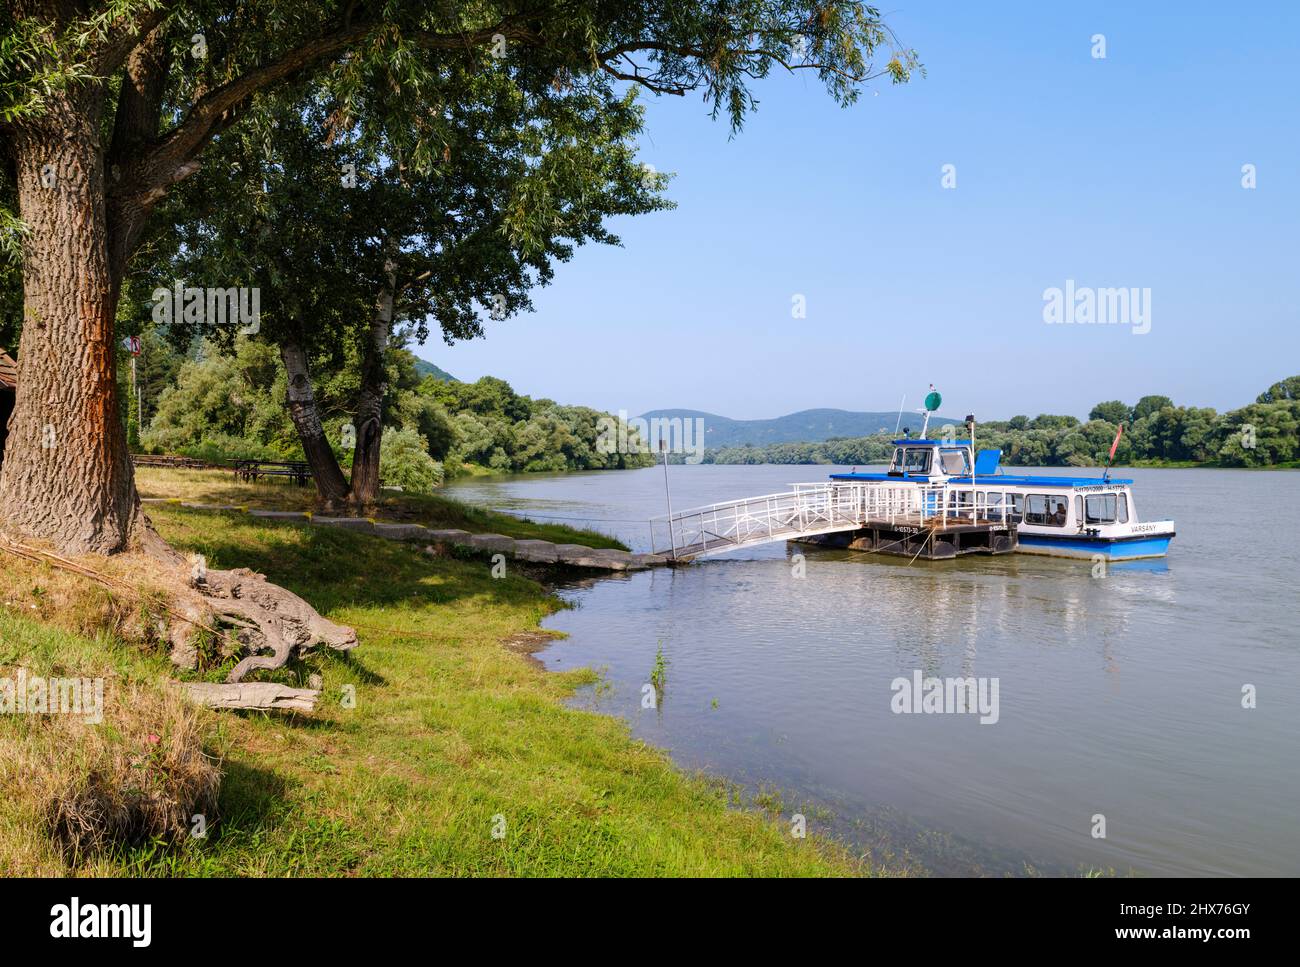 Jetty near Dunabogdany  crossing an arm of river Danube to the island of Szentendre.    Europe, East Europe, Hungary Stock Photo